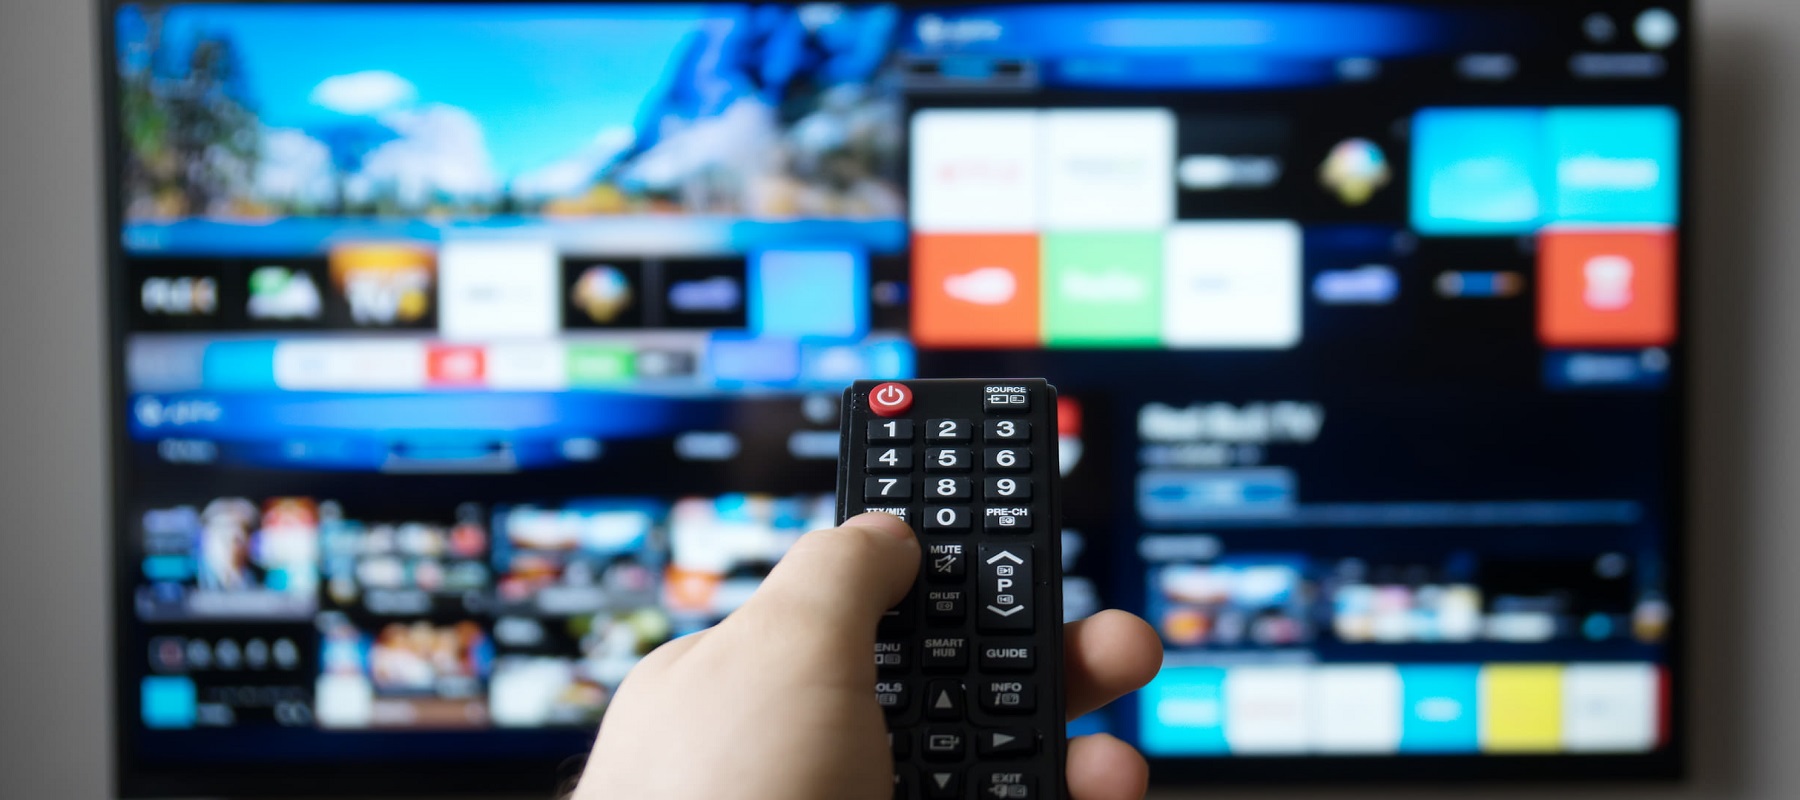 Majority of Canadian consumers likely to engage with enhanced connected TV ad formats, report